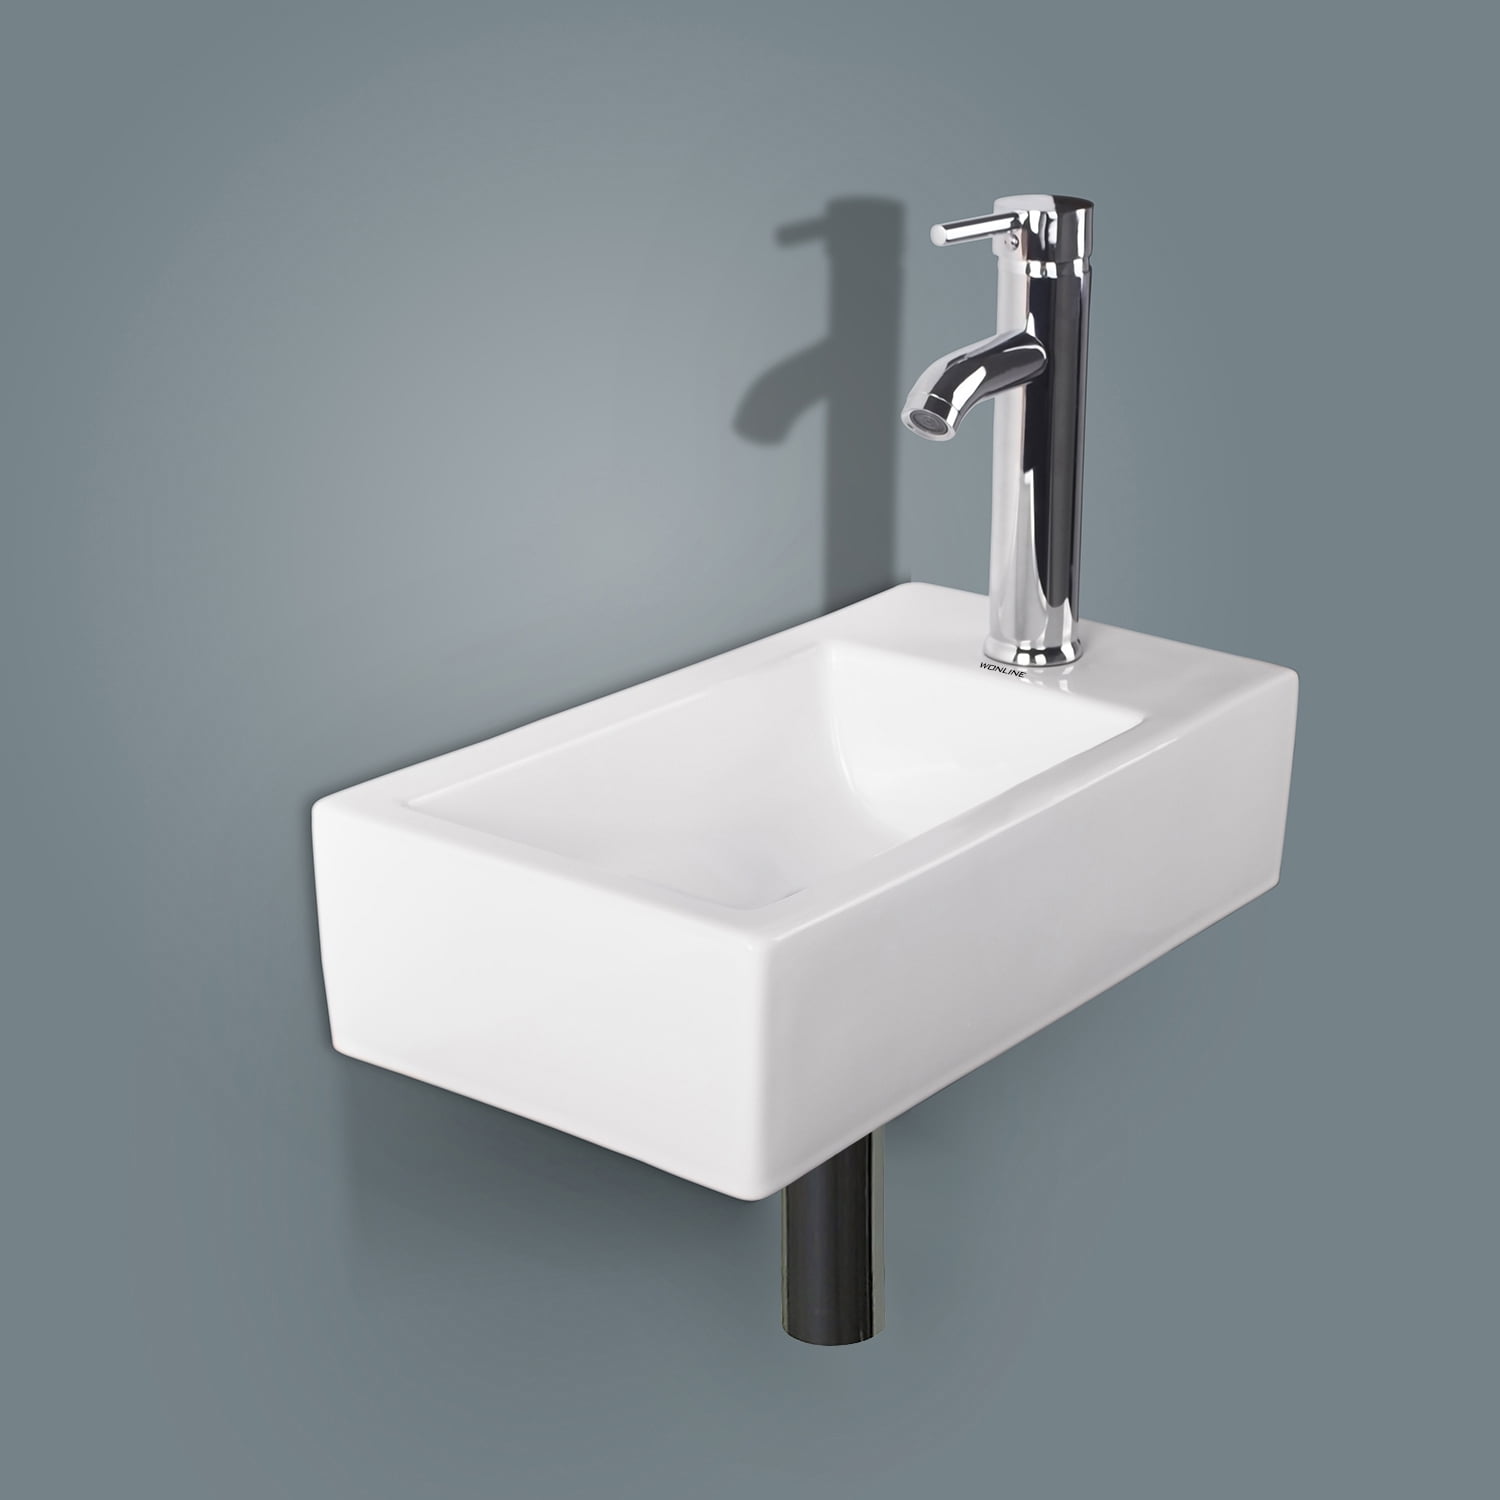 Soap holder - White porcelain and Chrome - wall mounted - Style CURZON -  BATHROOM - VillaHus